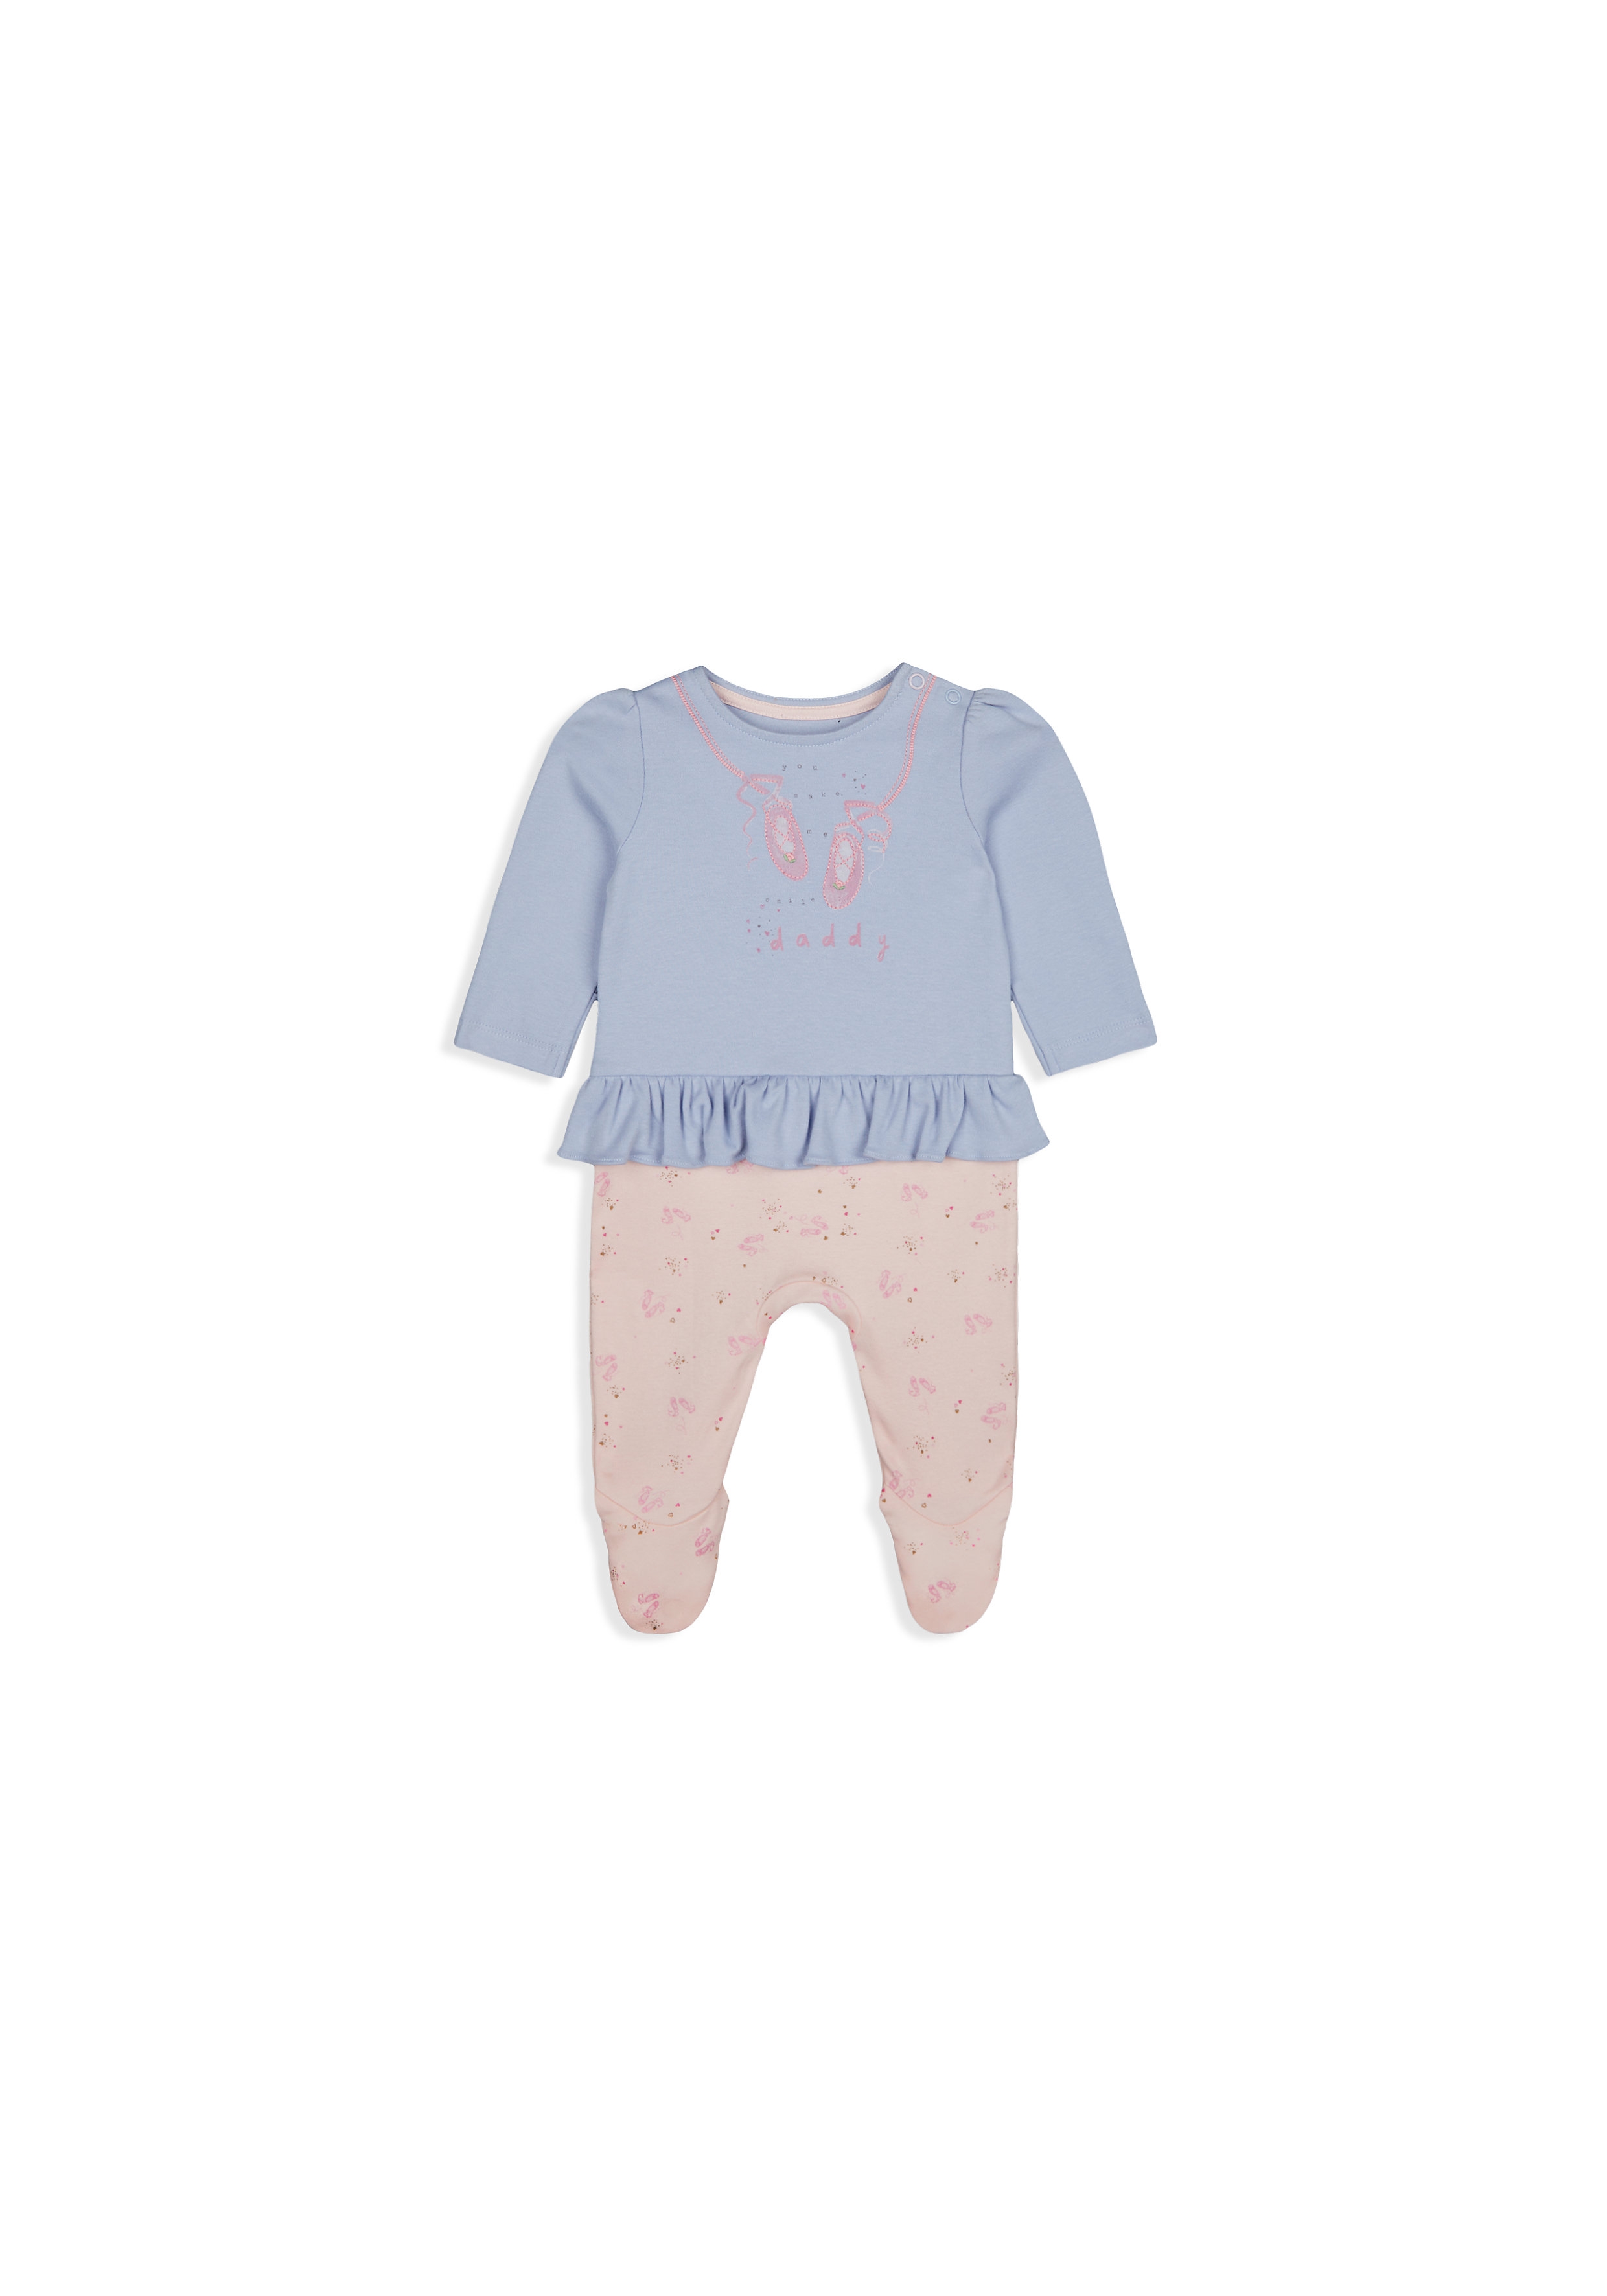 Mothercare | Girls Full Sleeves Mock Romper Ballet Shoes Embroidery - Blue 0